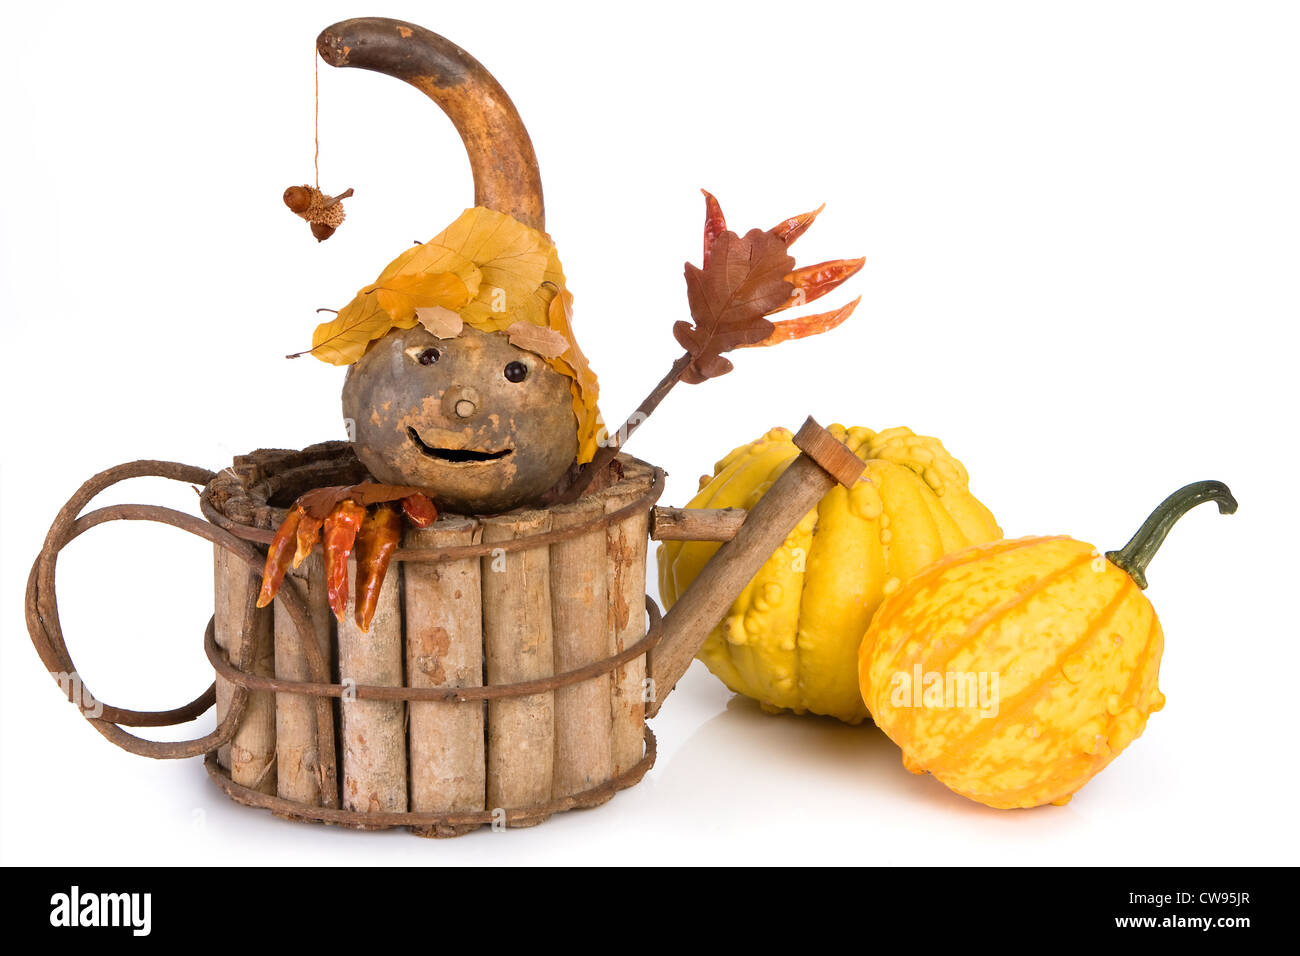 Puppet made of autumn materials and holiday pumpkins Stock Photo